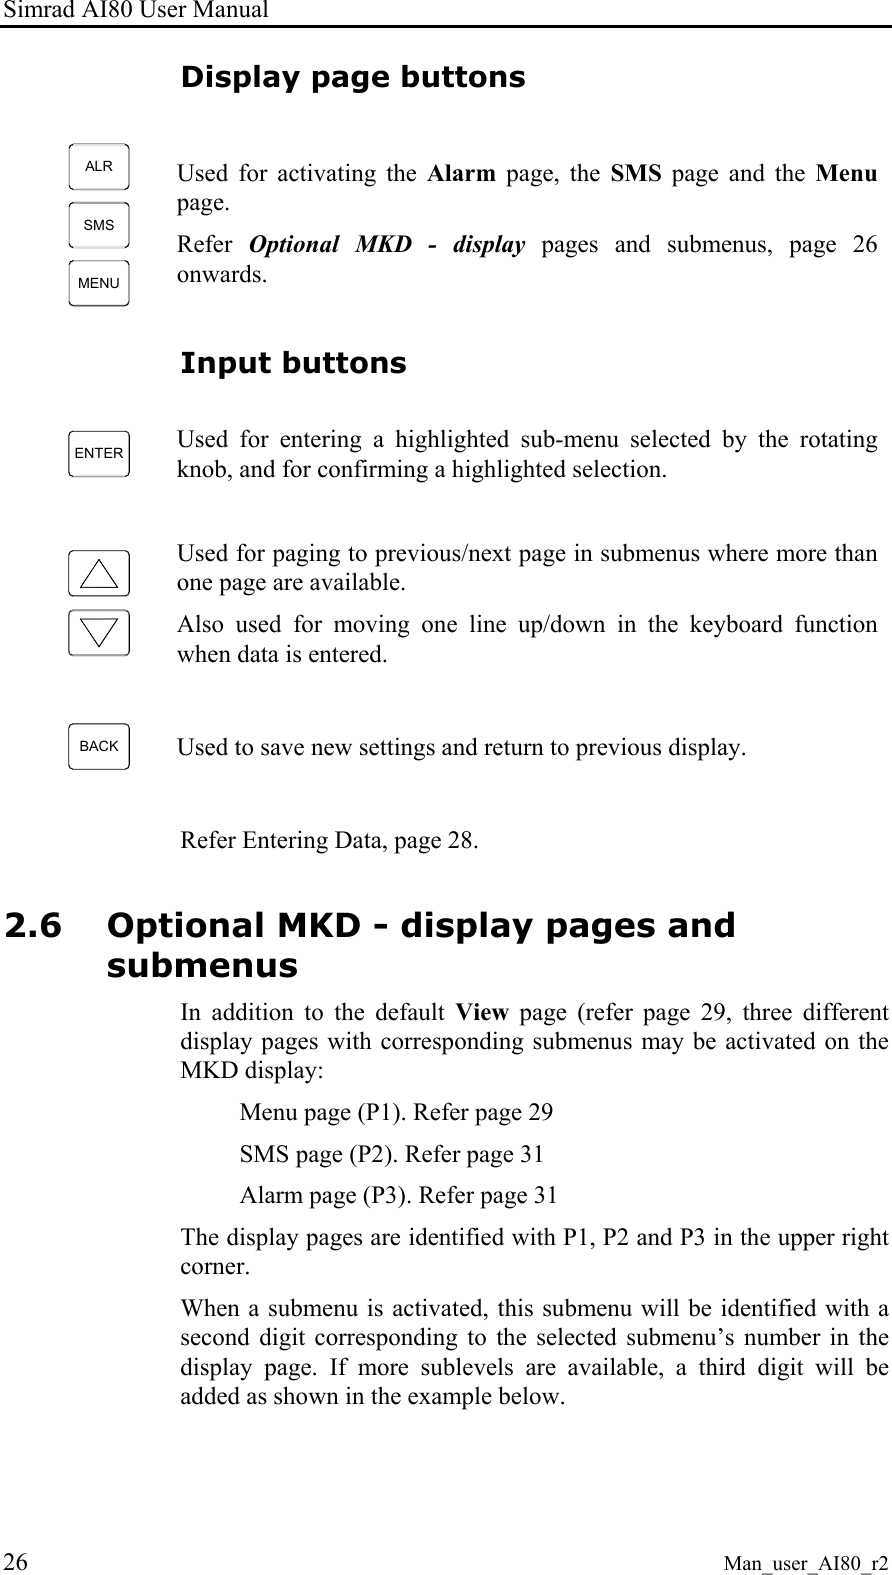 Simrad AI80 User Manual 26 Man_user_AI80_r2 Display page buttons  ALRSMSMENU Used for activating the Alarm page, the SMS page and the Menu page. Refer  Optional MKD - display pages and submenus, page 26 onwards. Input buttons  ENTER Used for entering a highlighted sub-menu selected by the rotating knob, and for confirming a highlighted selection.    Used for paging to previous/next page in submenus where more than one page are available. Also used for moving one line up/down in the keyboard function when data is entered.  BACK Used to save new settings and return to previous display.  Refer Entering Data, page 28. 2.6 Optional MKD - display pages and submenus In addition to the default View page (refer page 29, three different display pages with corresponding submenus may be activated on the MKD display: Menu page (P1). Refer page 29 SMS page (P2). Refer page 31 Alarm page (P3). Refer page 31 The display pages are identified with P1, P2 and P3 in the upper right corner. When a submenu is activated, this submenu will be identified with a second digit corresponding to the selected submenu’s number in the display page. If more sublevels are available, a third digit will be added as shown in the example below.  